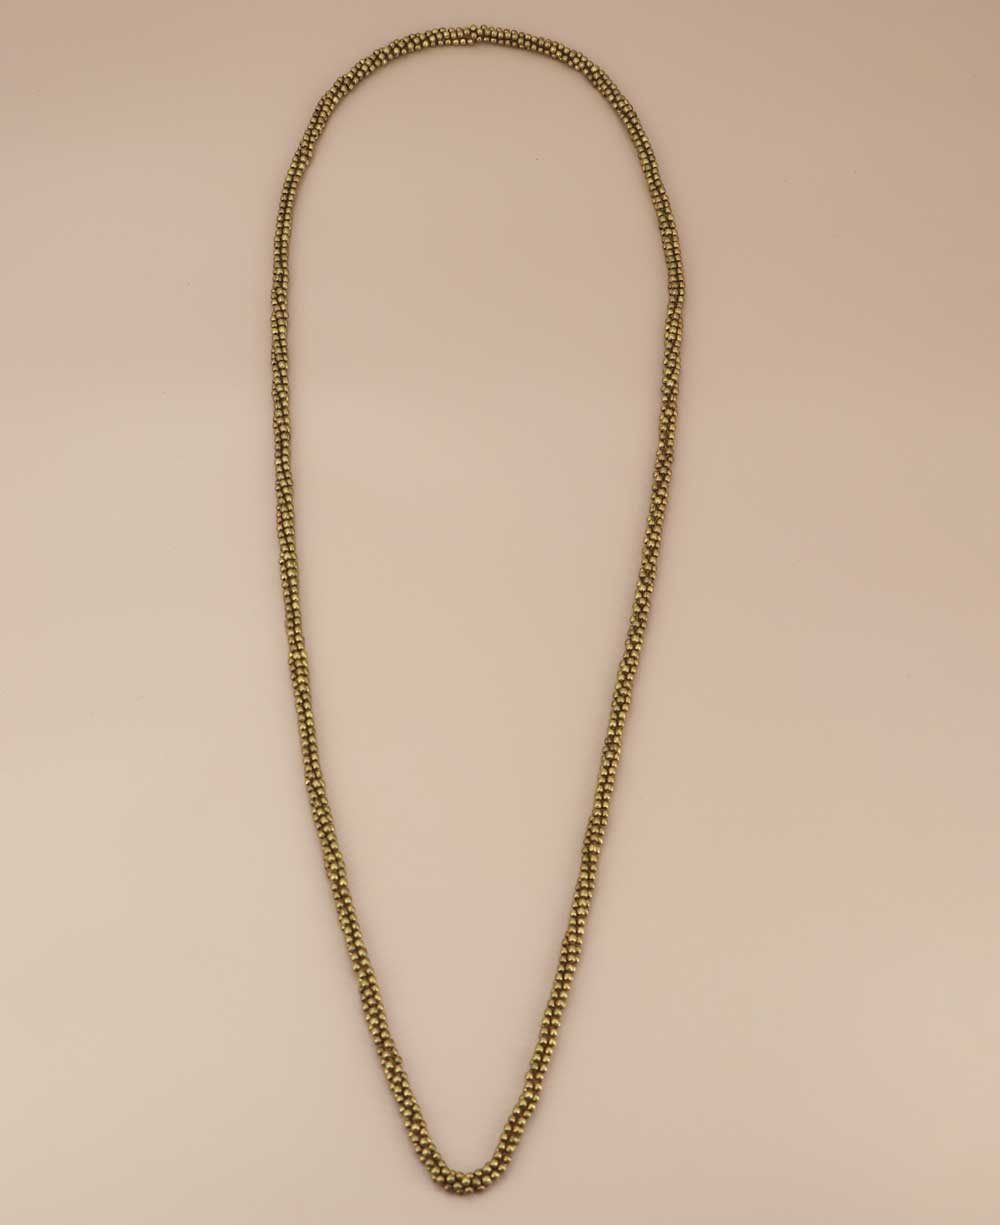 Elegant gold-colored metal bead necklace